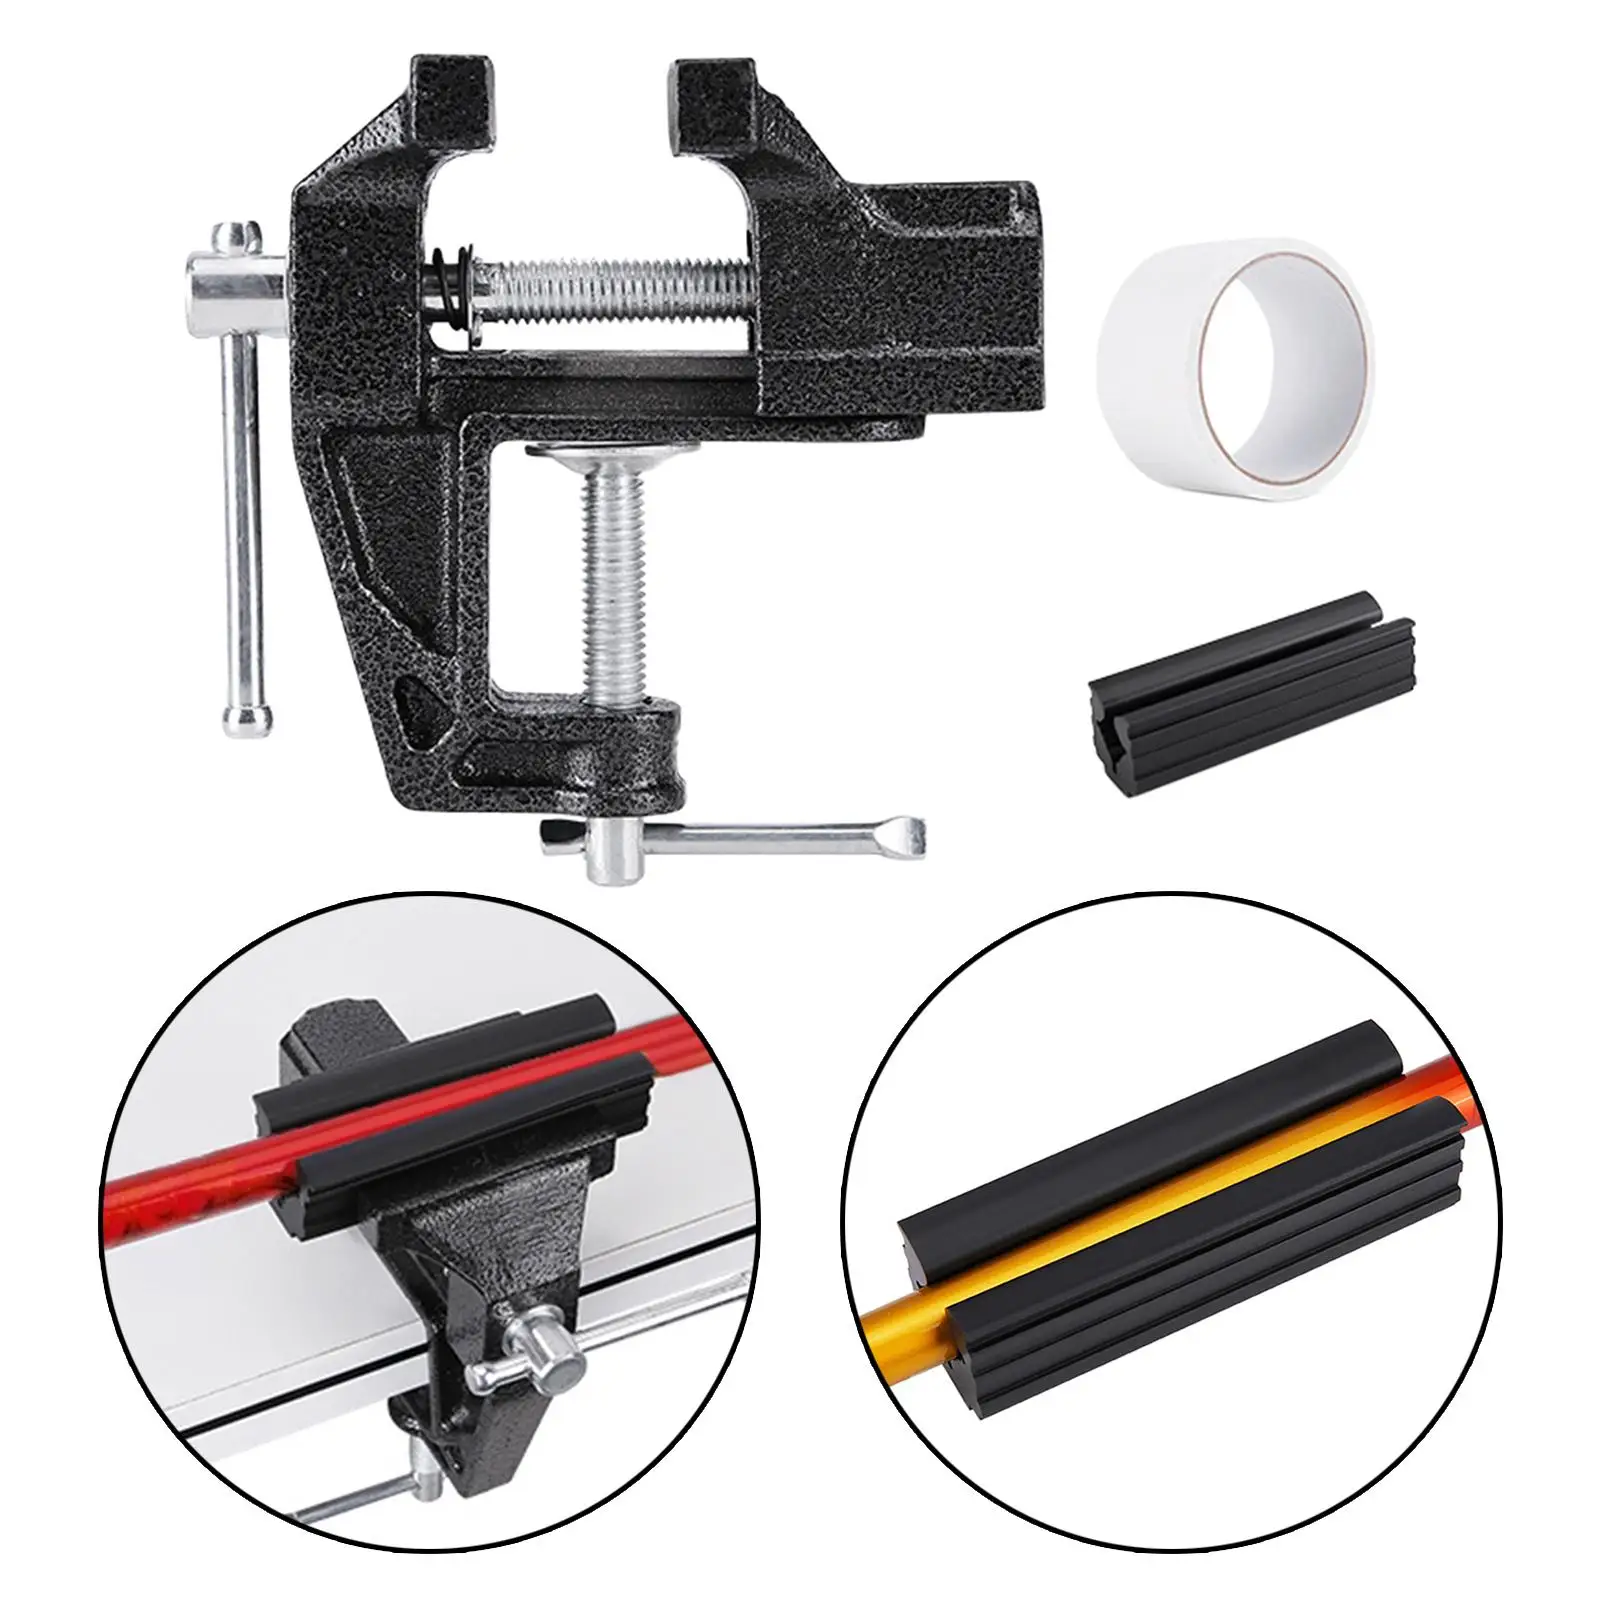 Golf Club Grip Vise Clamp Golf Grip for Regripping Golf Clubs Repair with Grip Tape Set for Golf Wedge Club Golf Driver Shaft